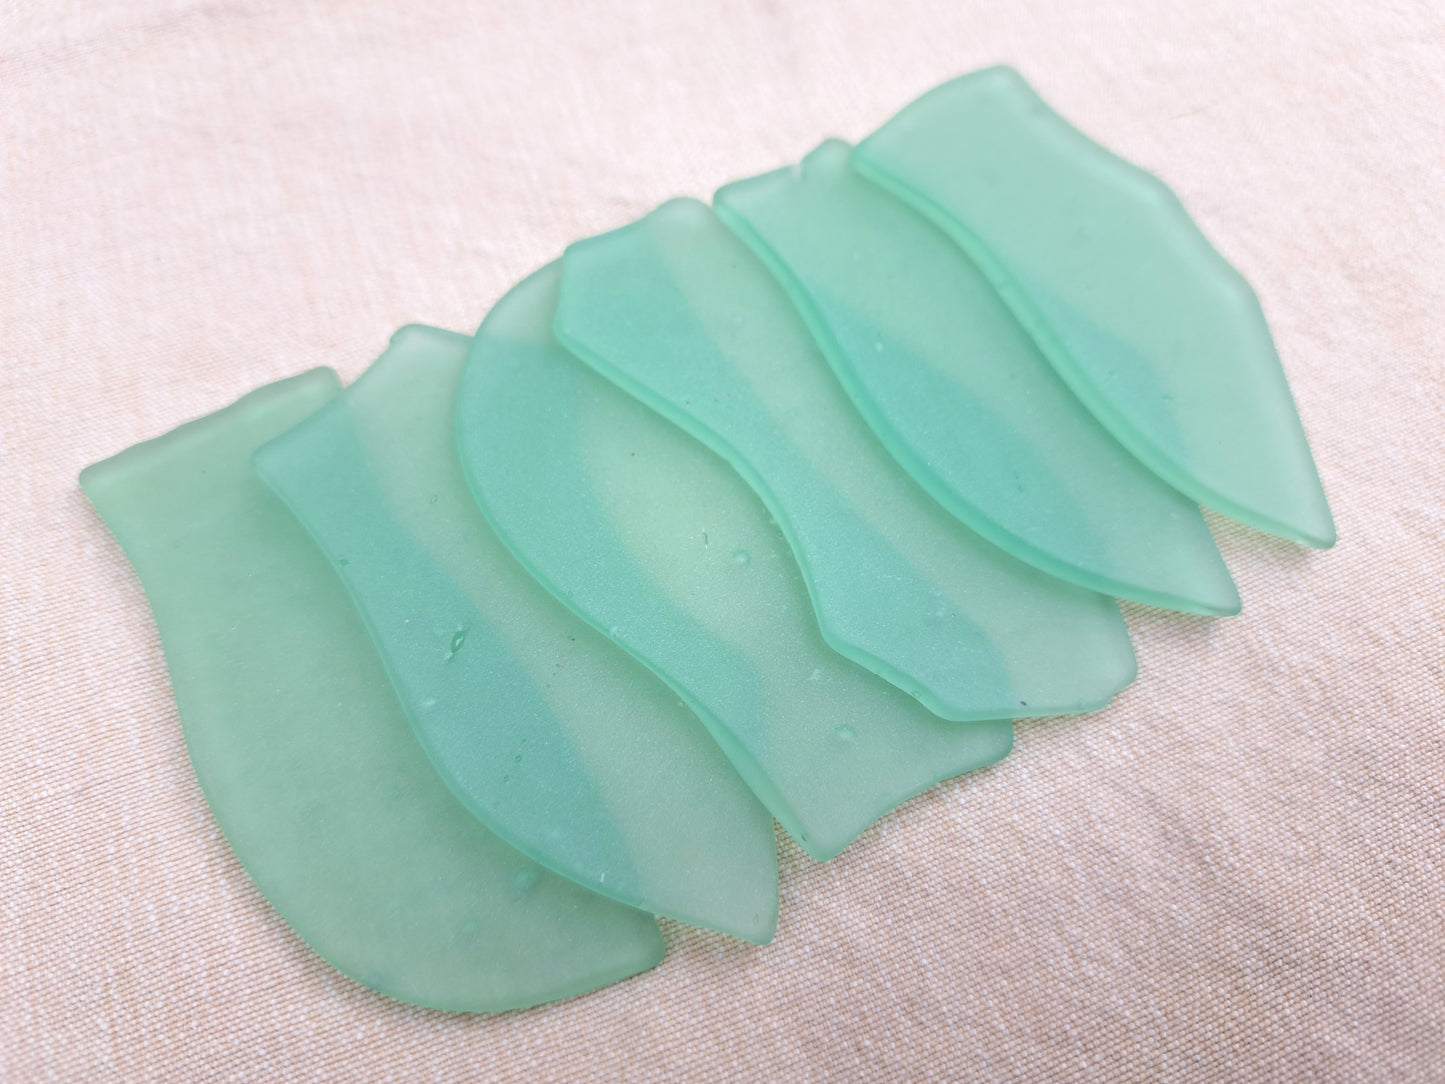 Mint Green Sea Glass Place Cards - Set of 20 - Irregular Shaped Pieces